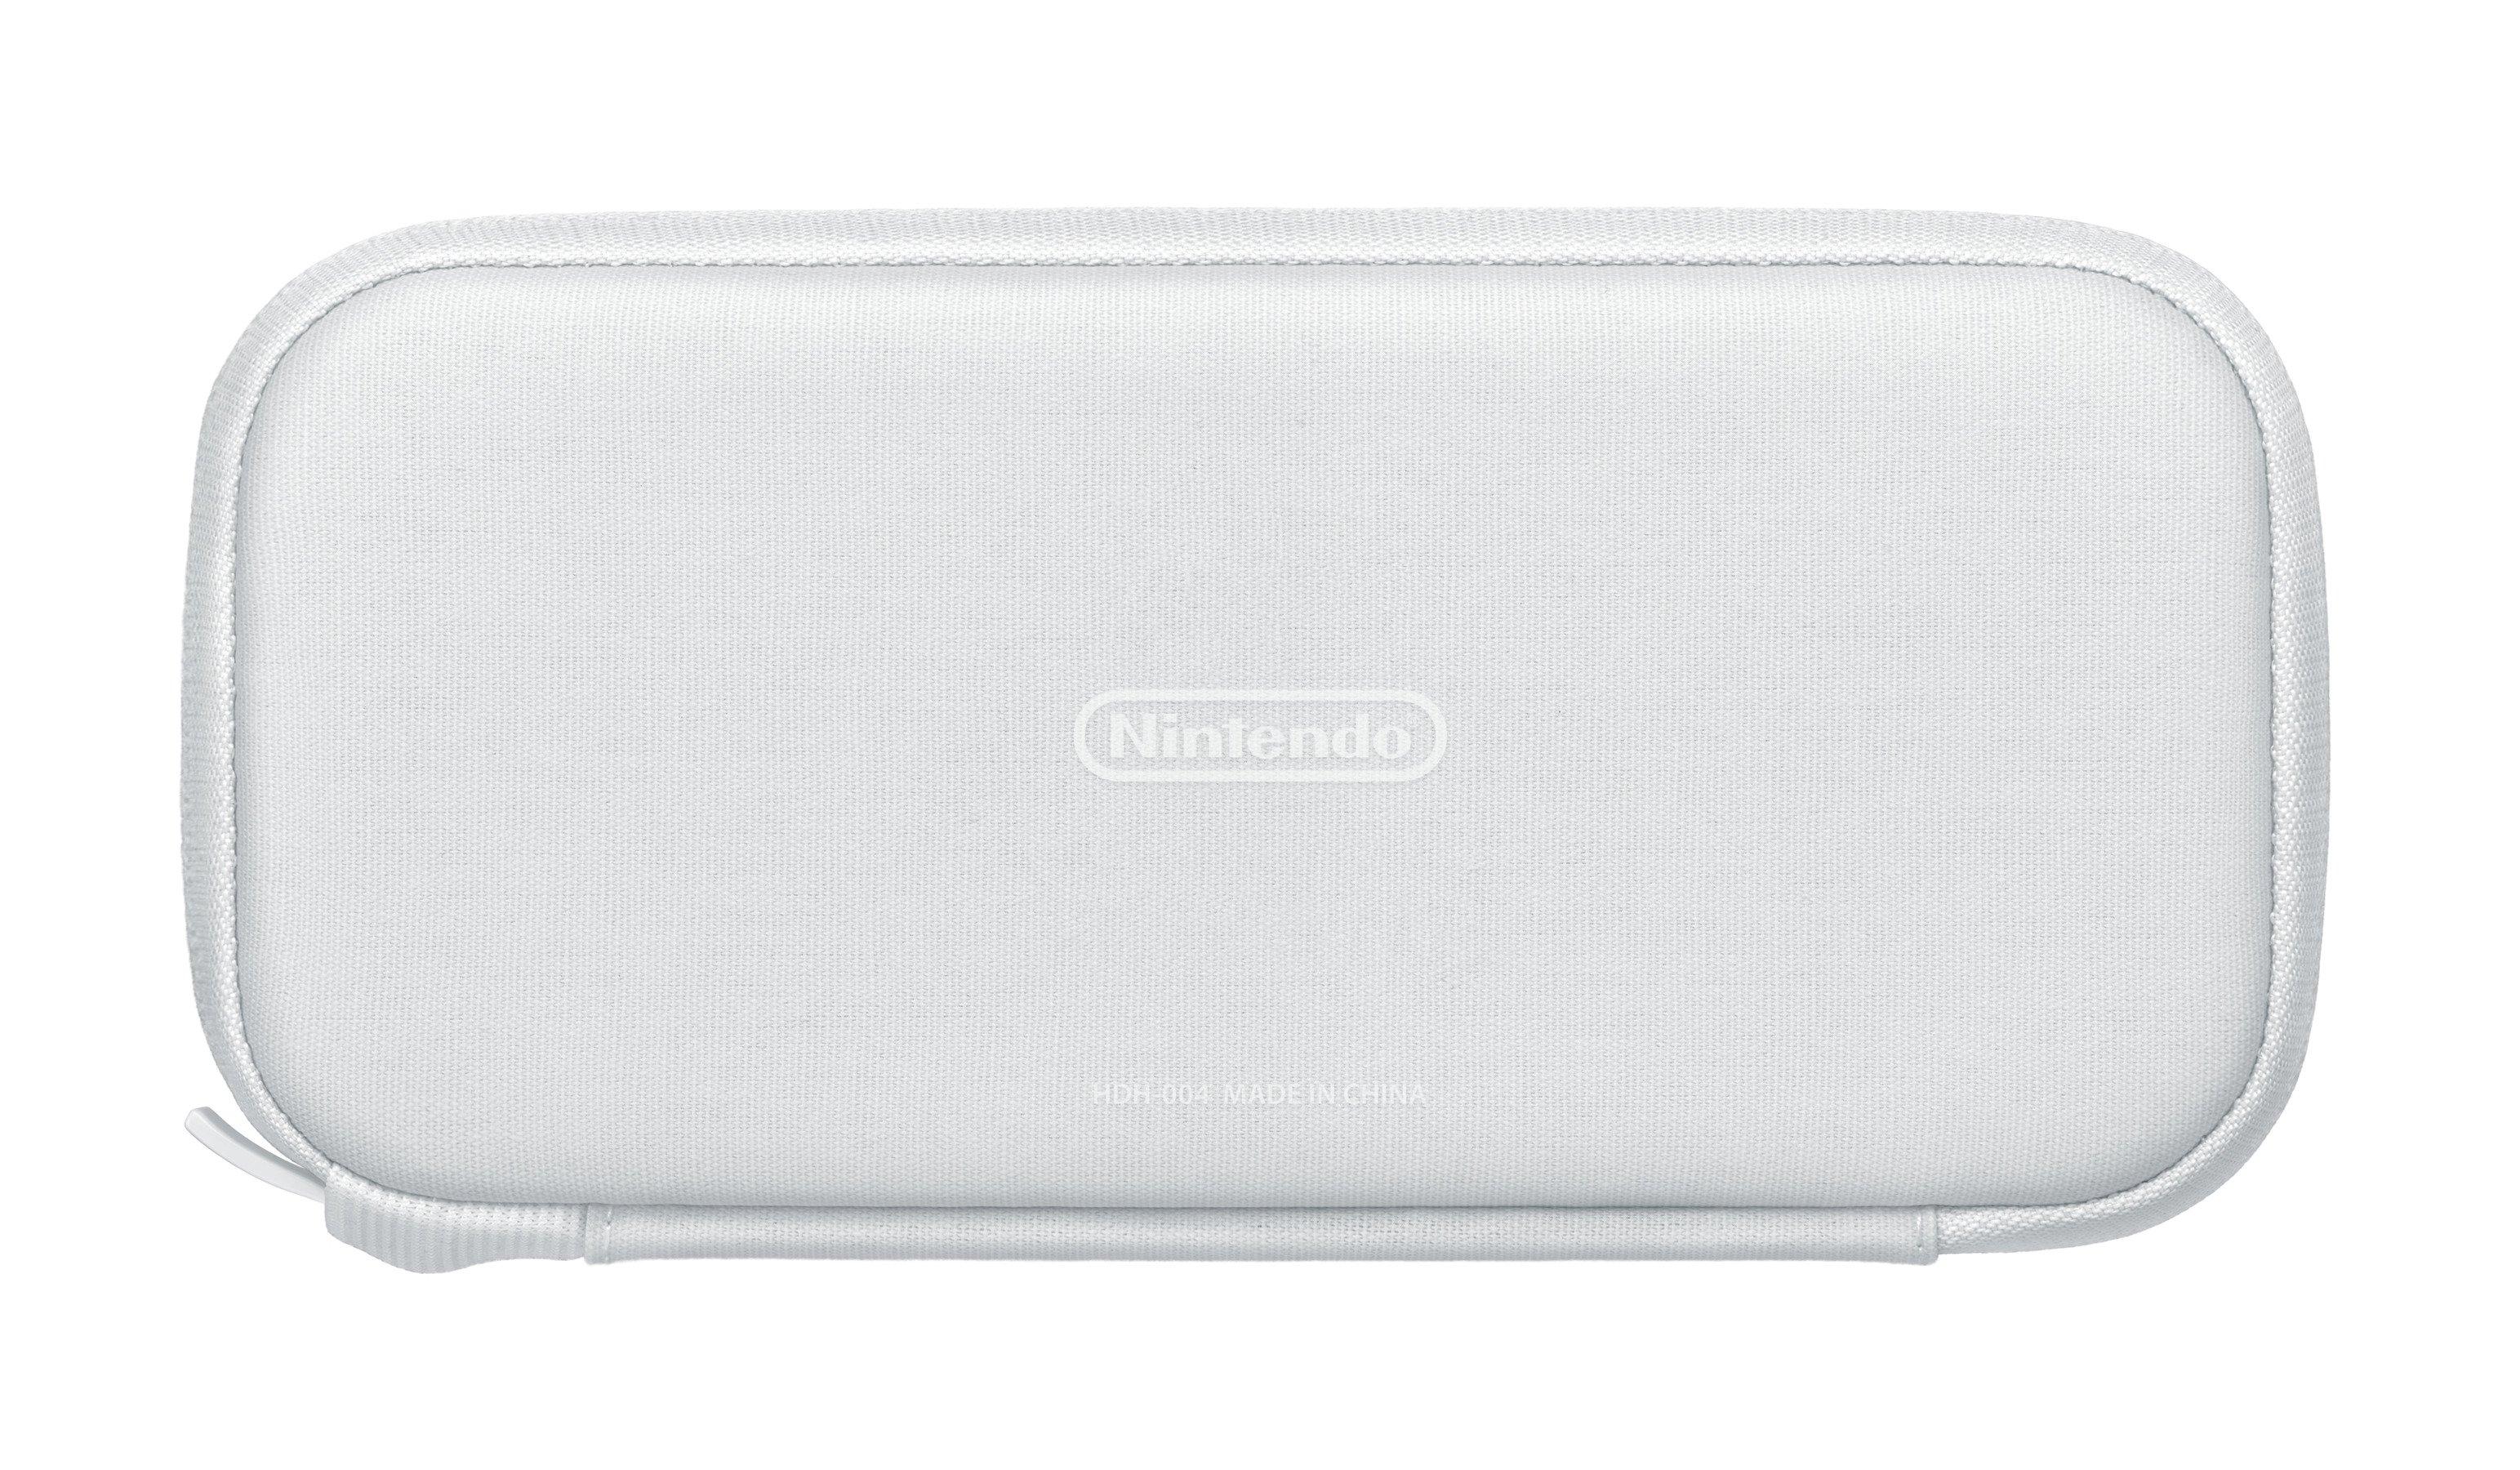 nintendo switch lite carrying case and screen protector